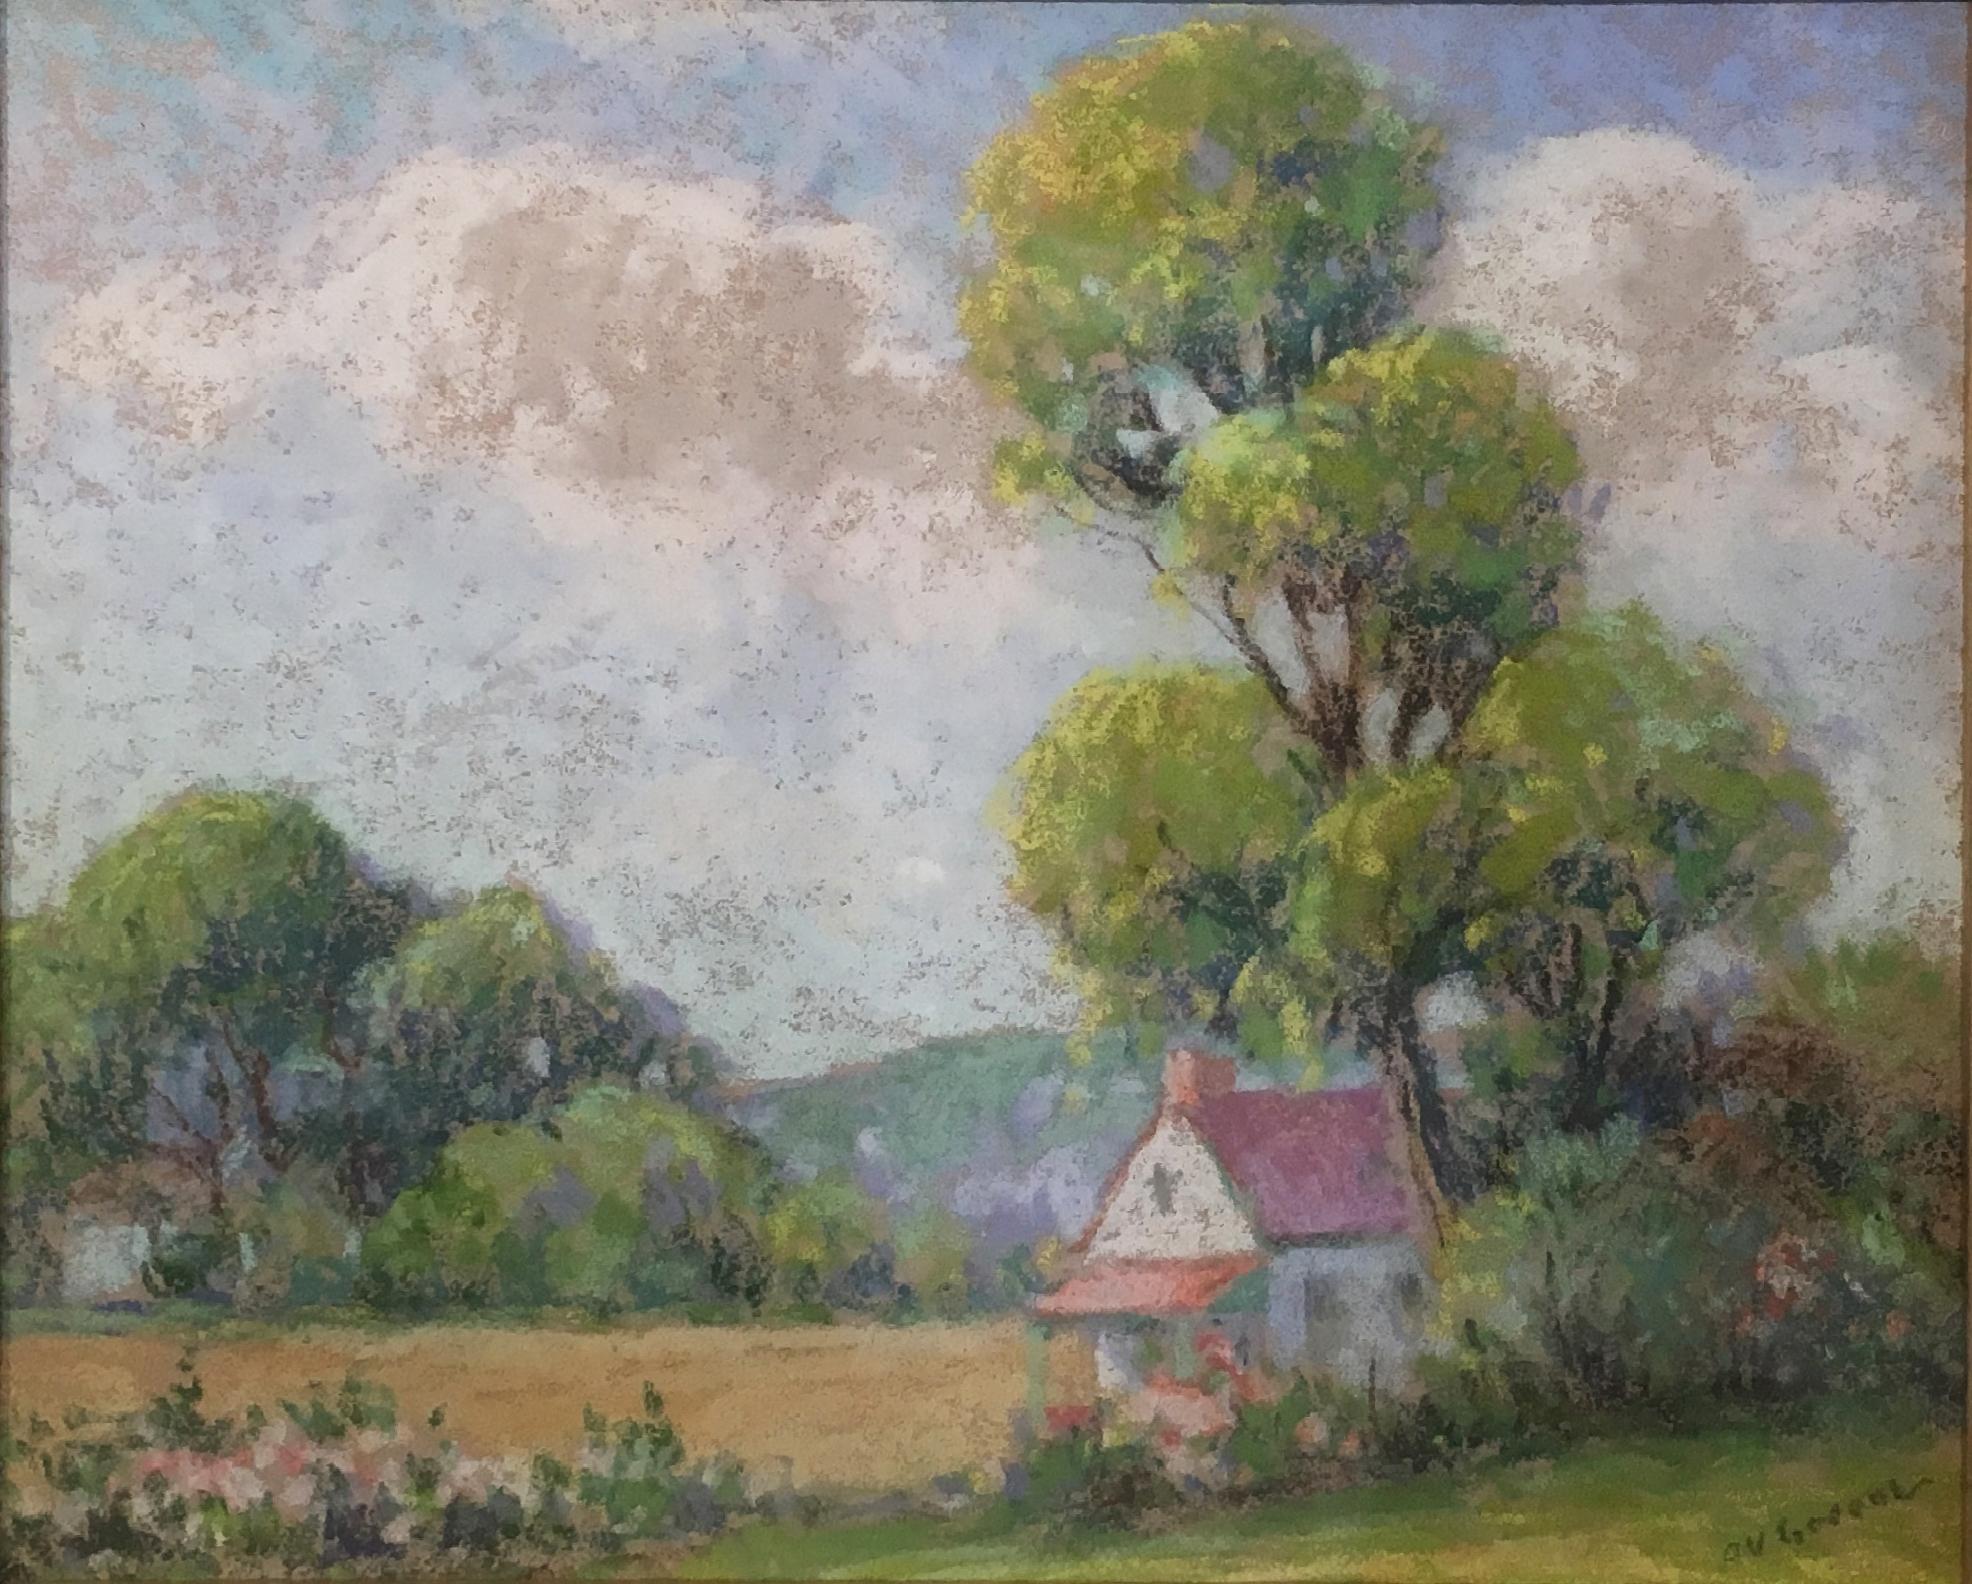 Houses in Summer, New Hope, American Impressionist Landscape, Pastel on Paper - Painting by Albert Van Nesse Greene